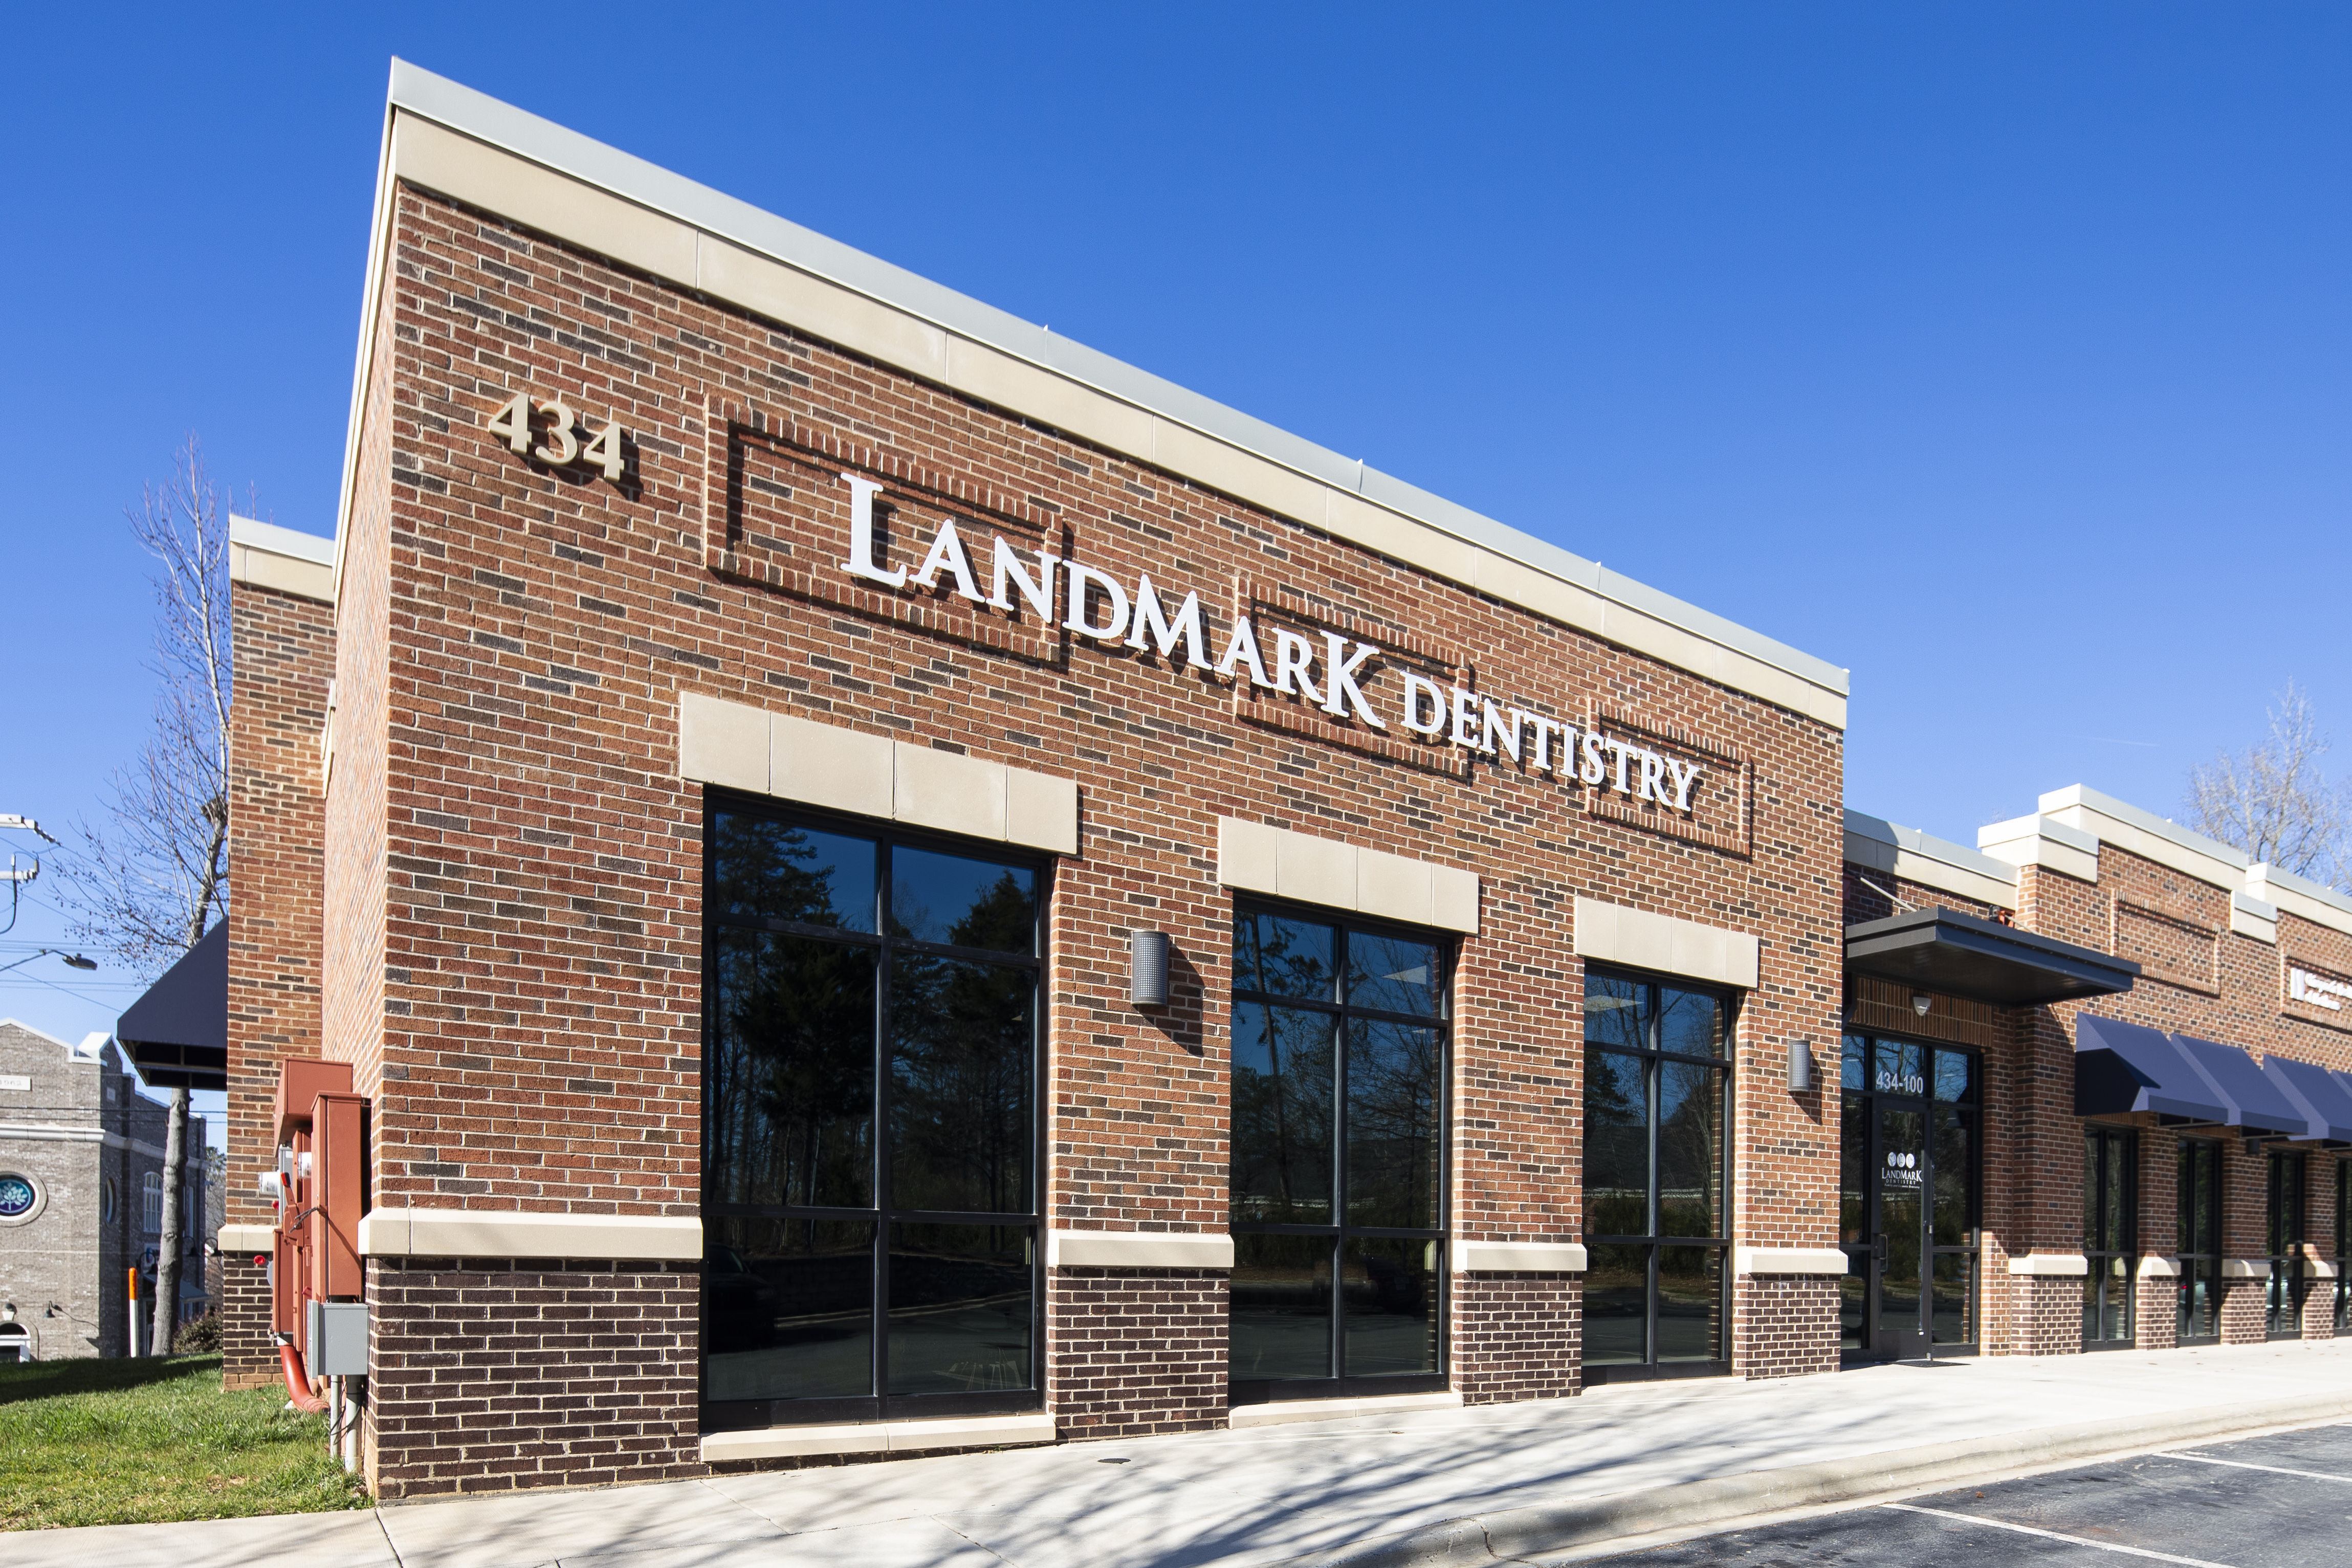 Front view of the office - LandMark Dentistry Matthews location